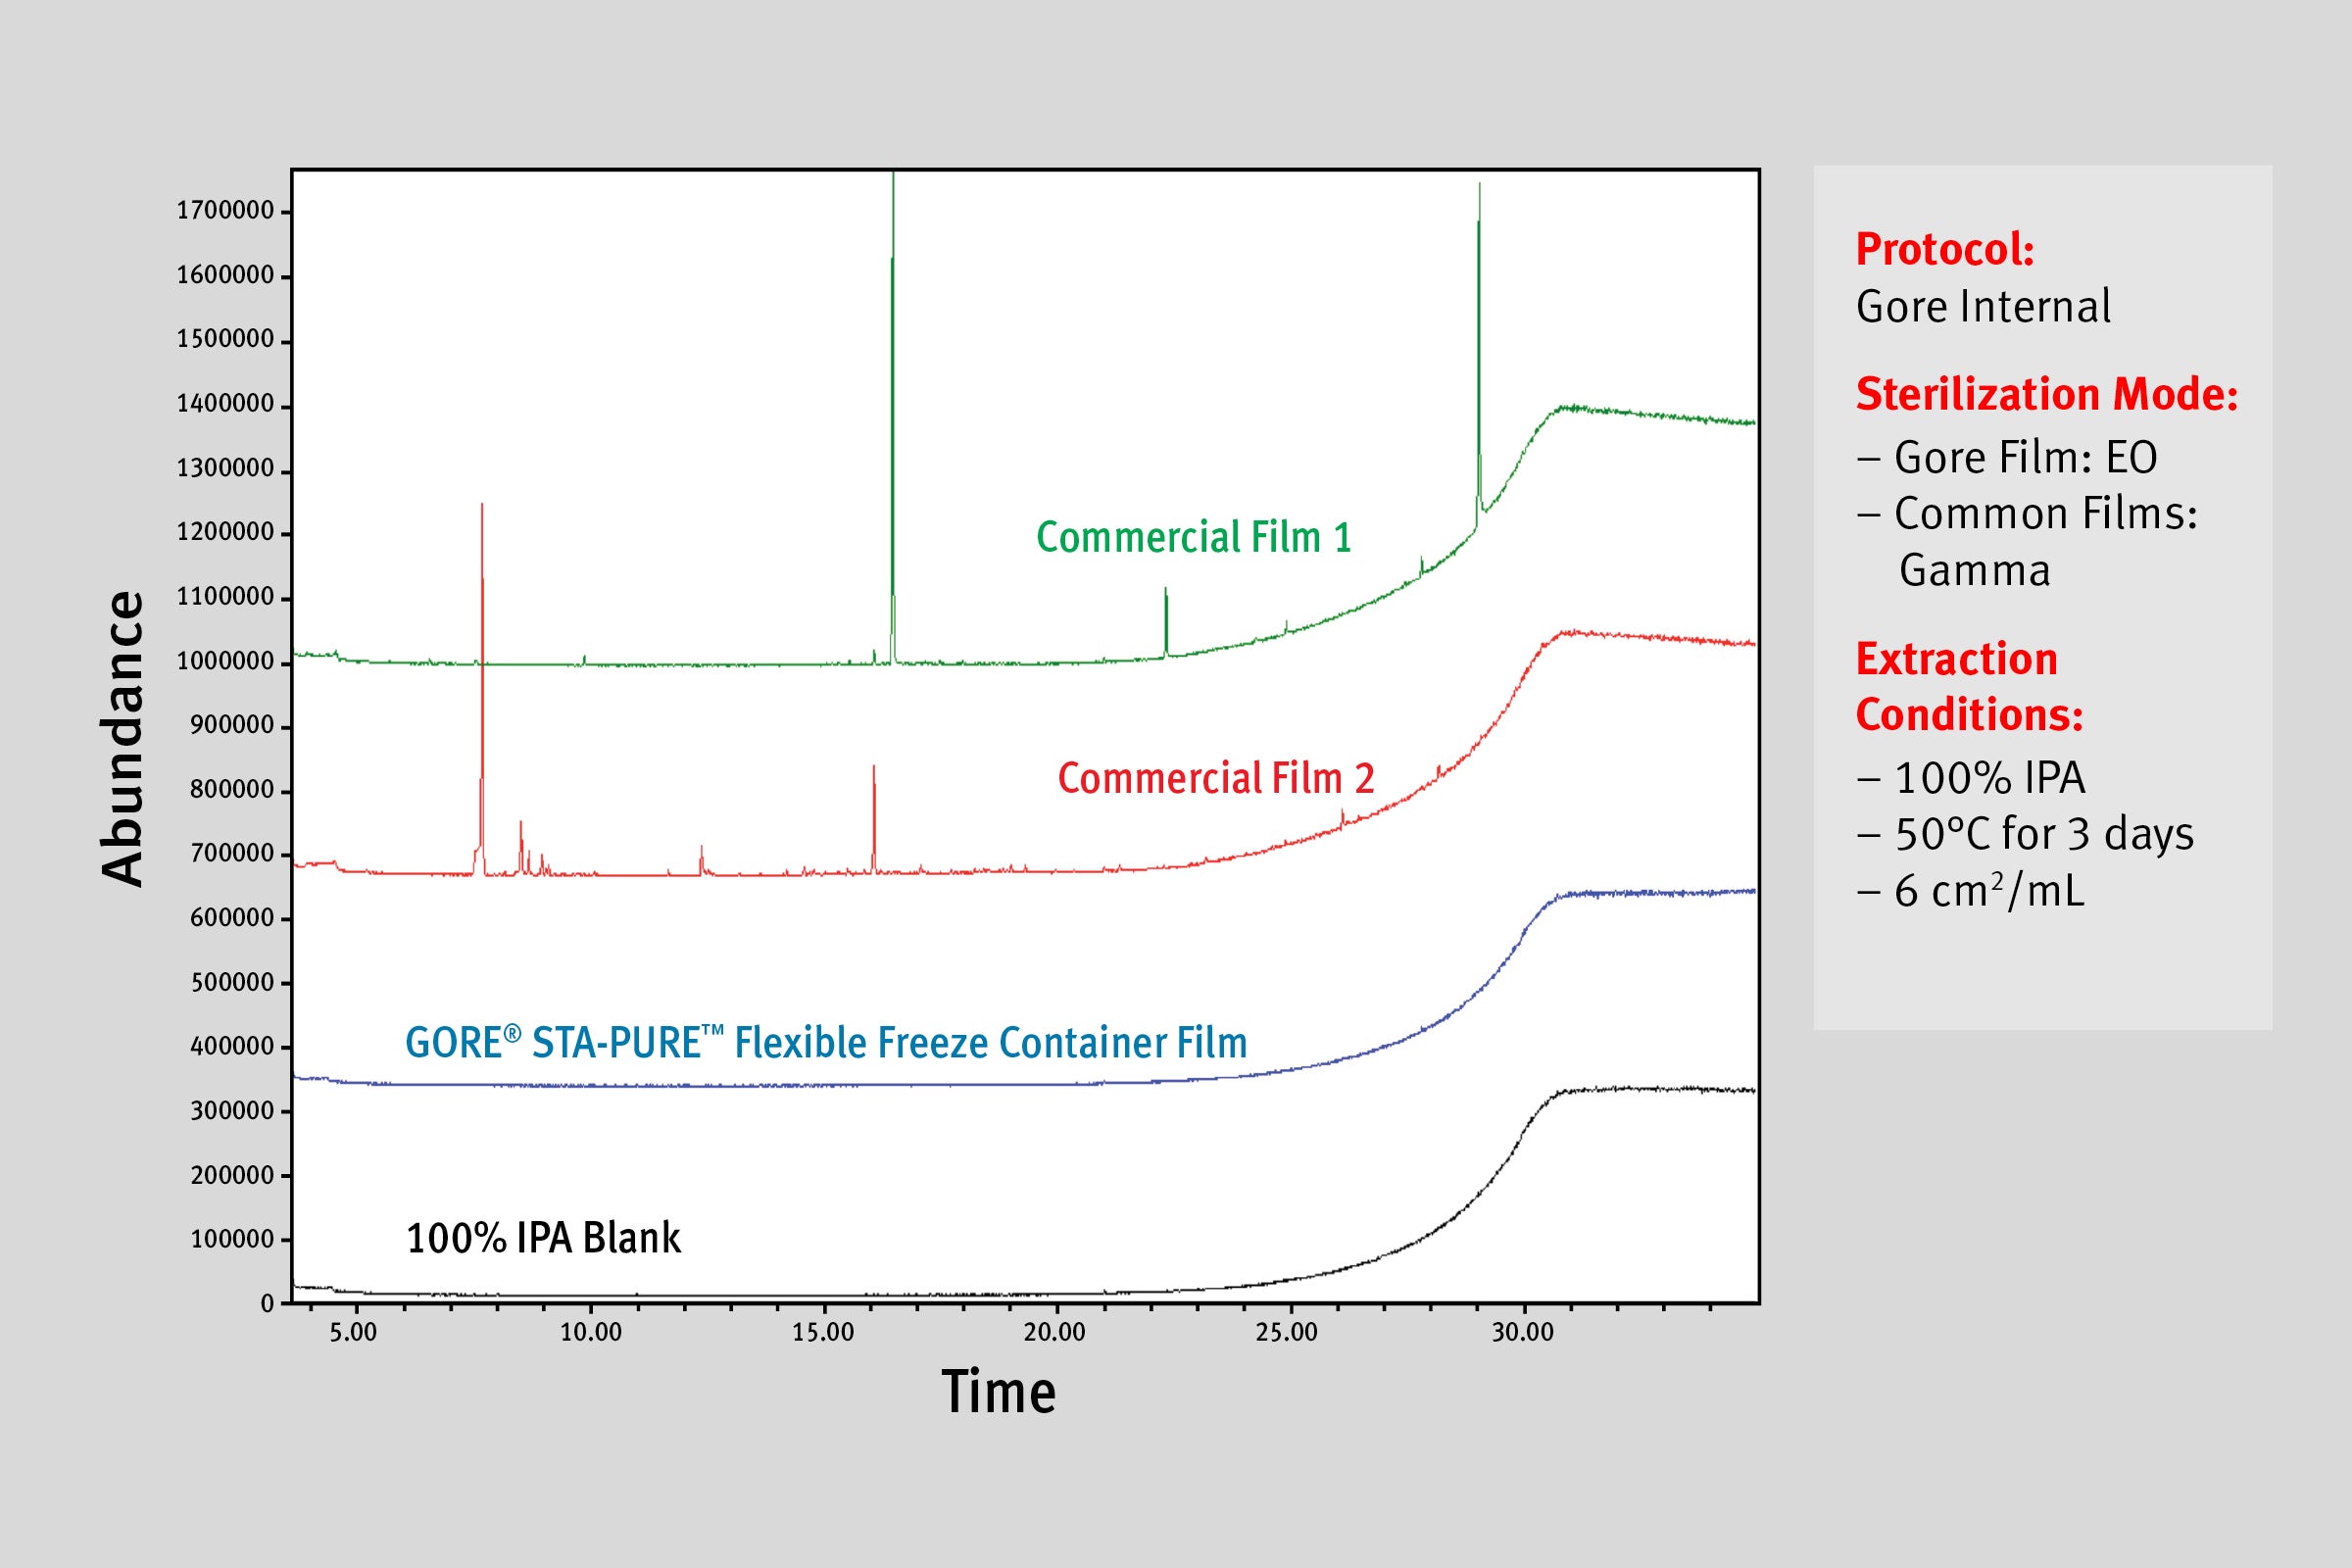 Graph comparing extractables profiles between GORE STA-PURE Flexible Freeze Container, two commercial films, and 100% IPA blank